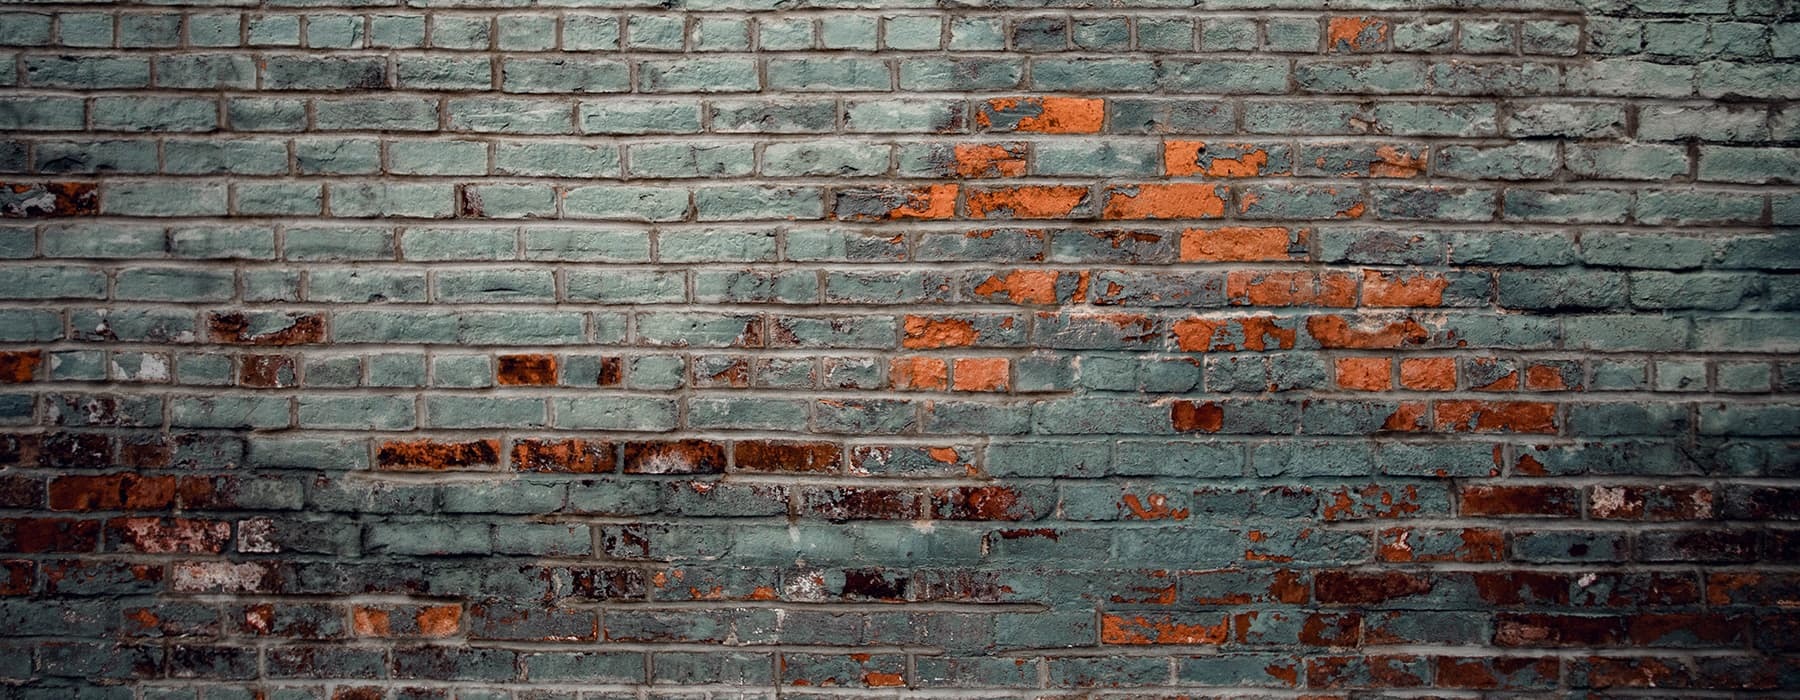 bricks on a wall showing property colors seen in the property branding